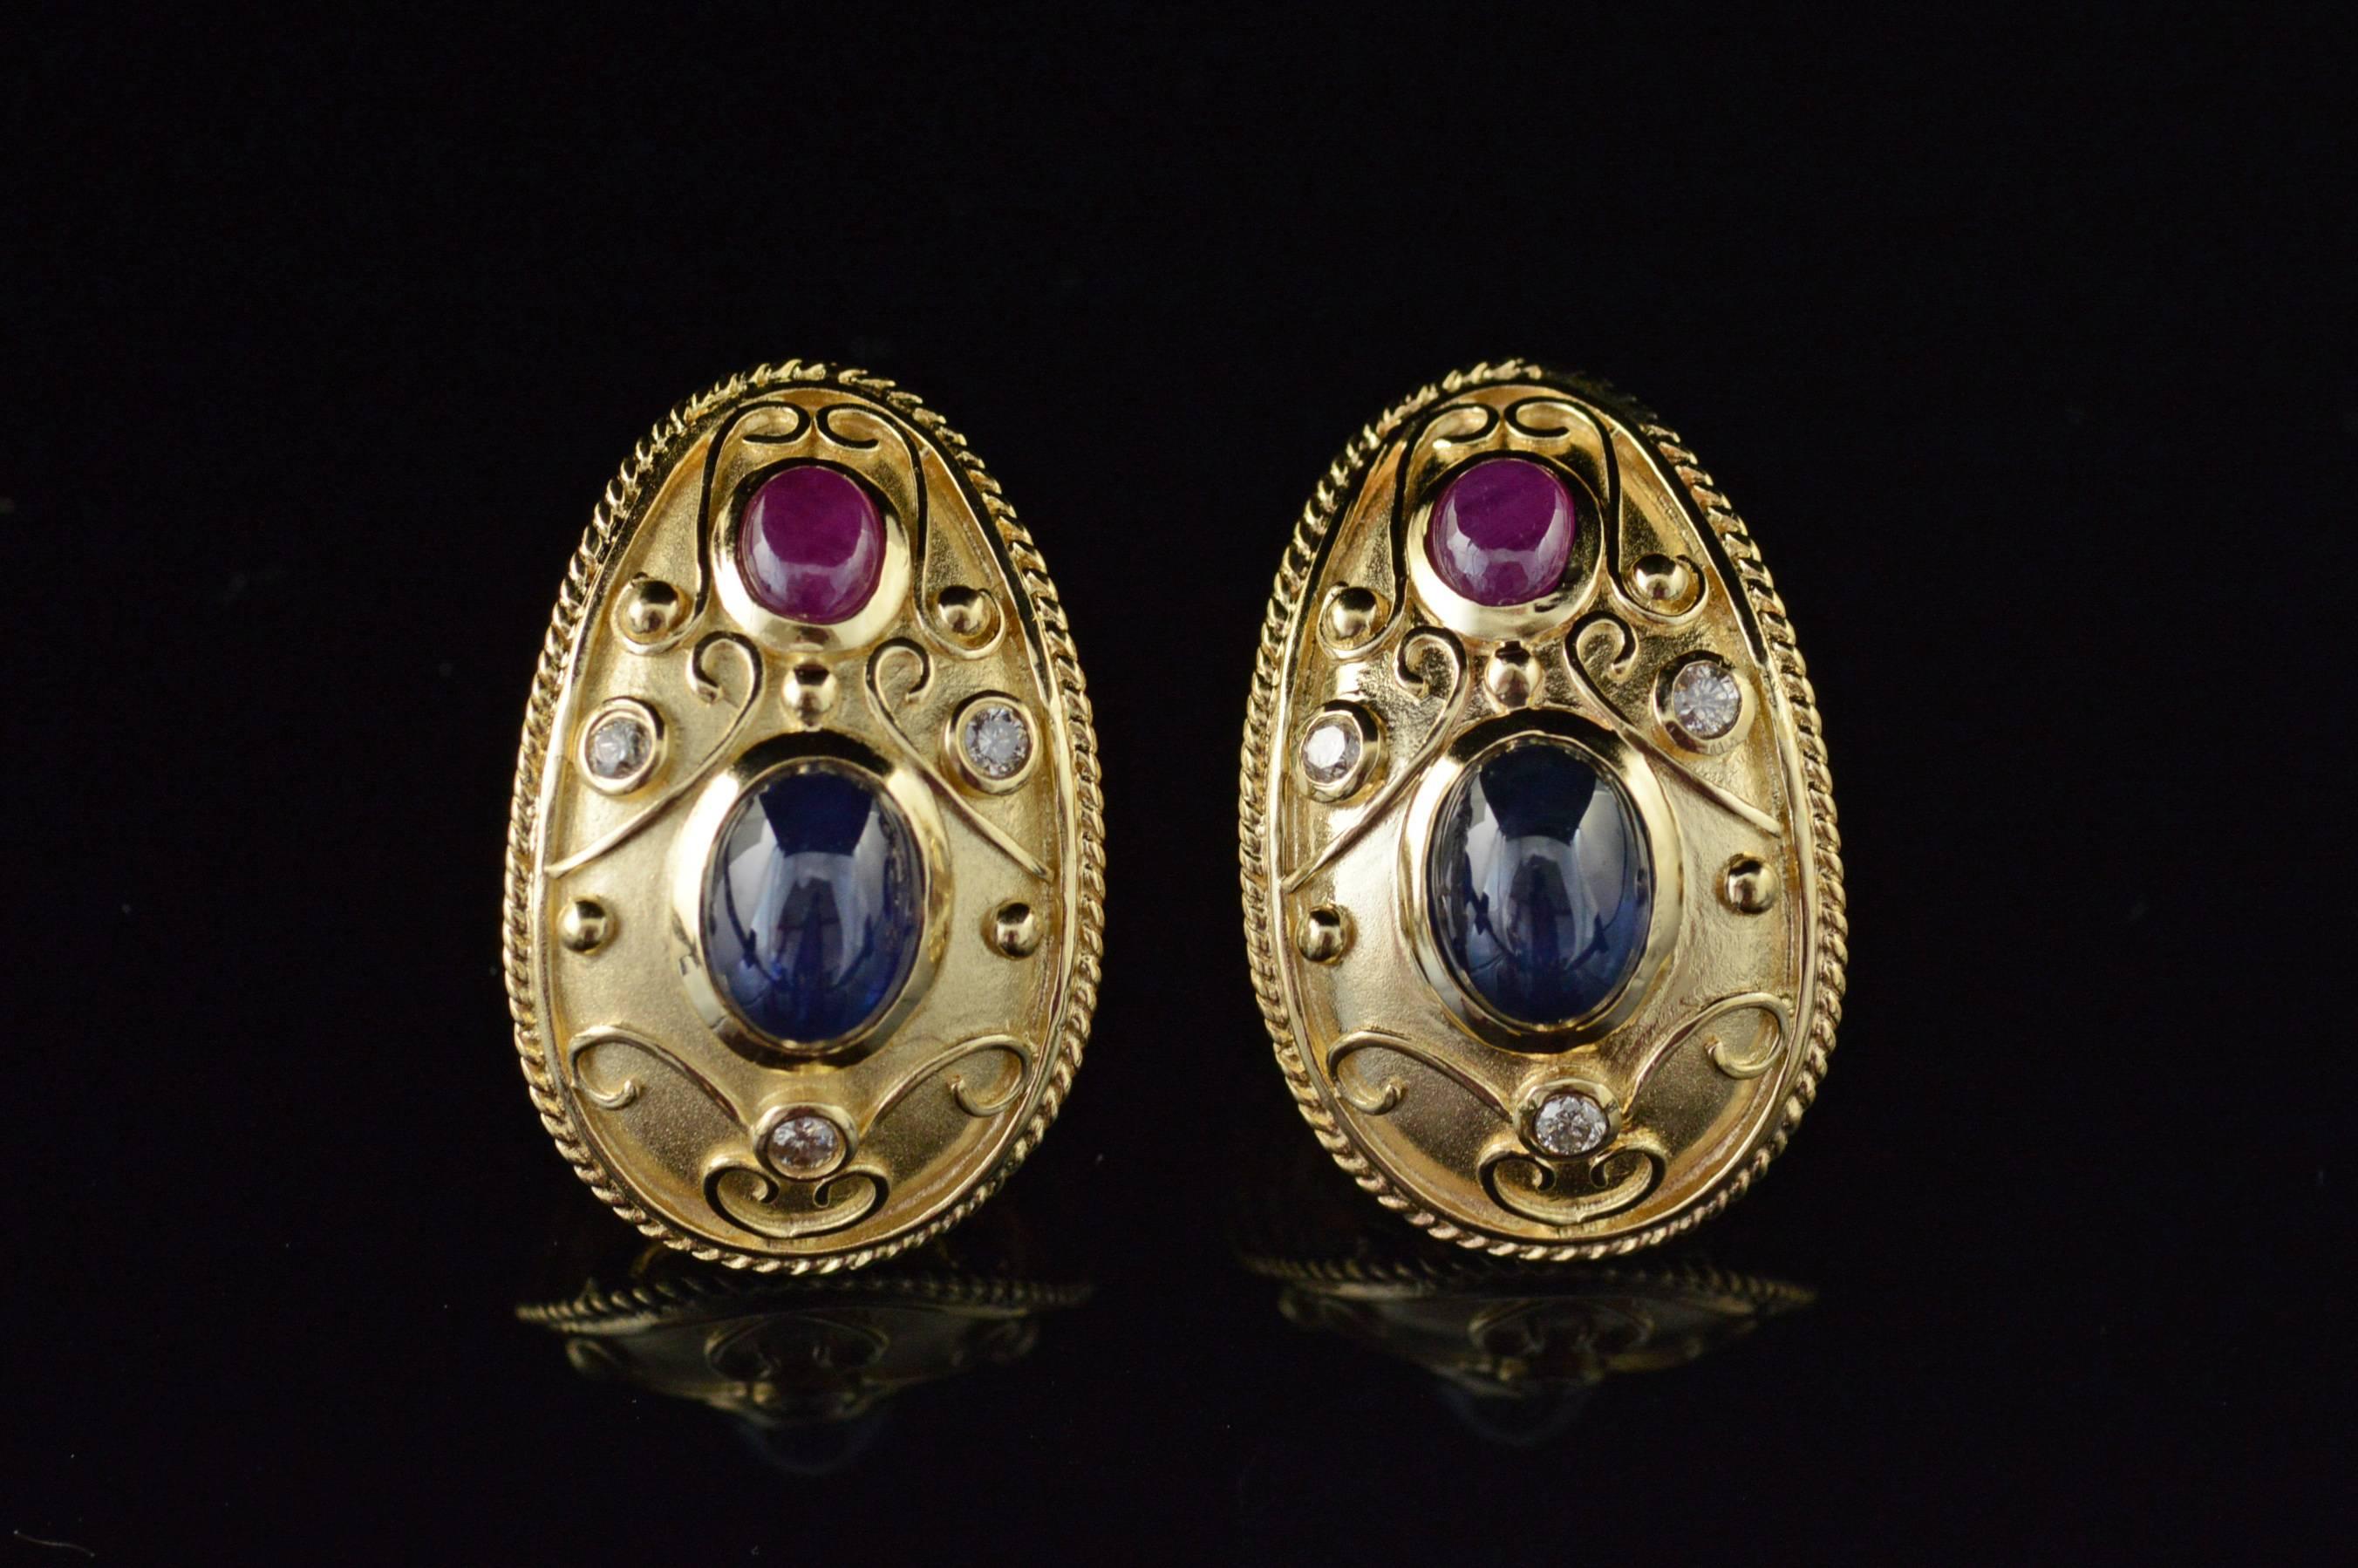 All diamonds are graded according to GIA grading standards. (When applicable)

·Item: 14K 2.60 CTW Sapphire Ruby Diamond French Clip Earrings Yellow Gold

·Era: Modern / 2000s

·Composition: 14k Gold Marked / Tested

·Gem Stone: 2x